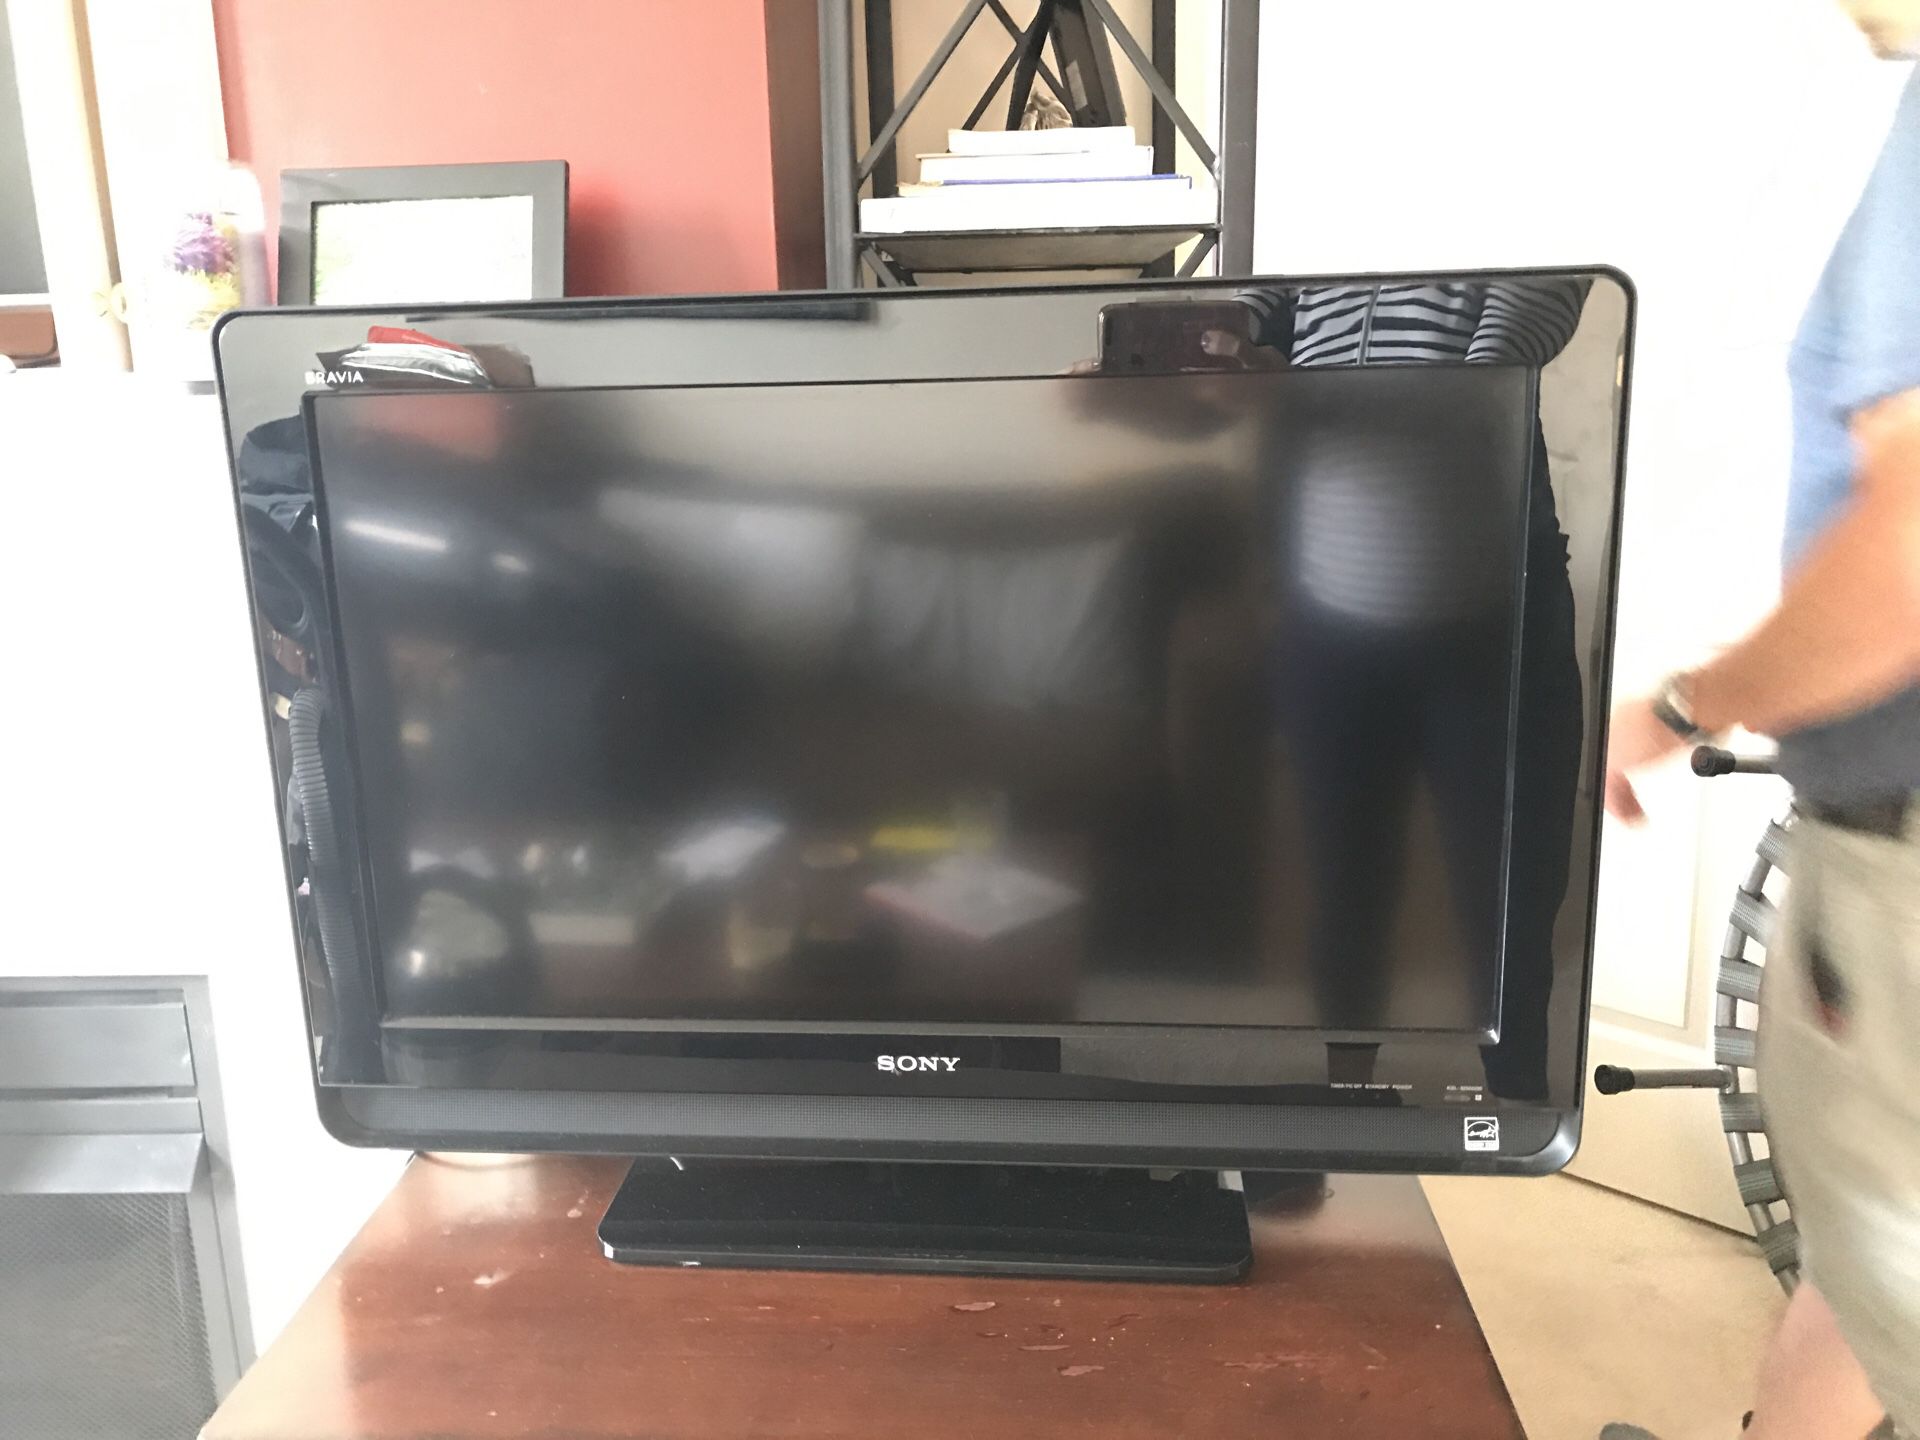 Sony LCD 32 inch Digital Color TV